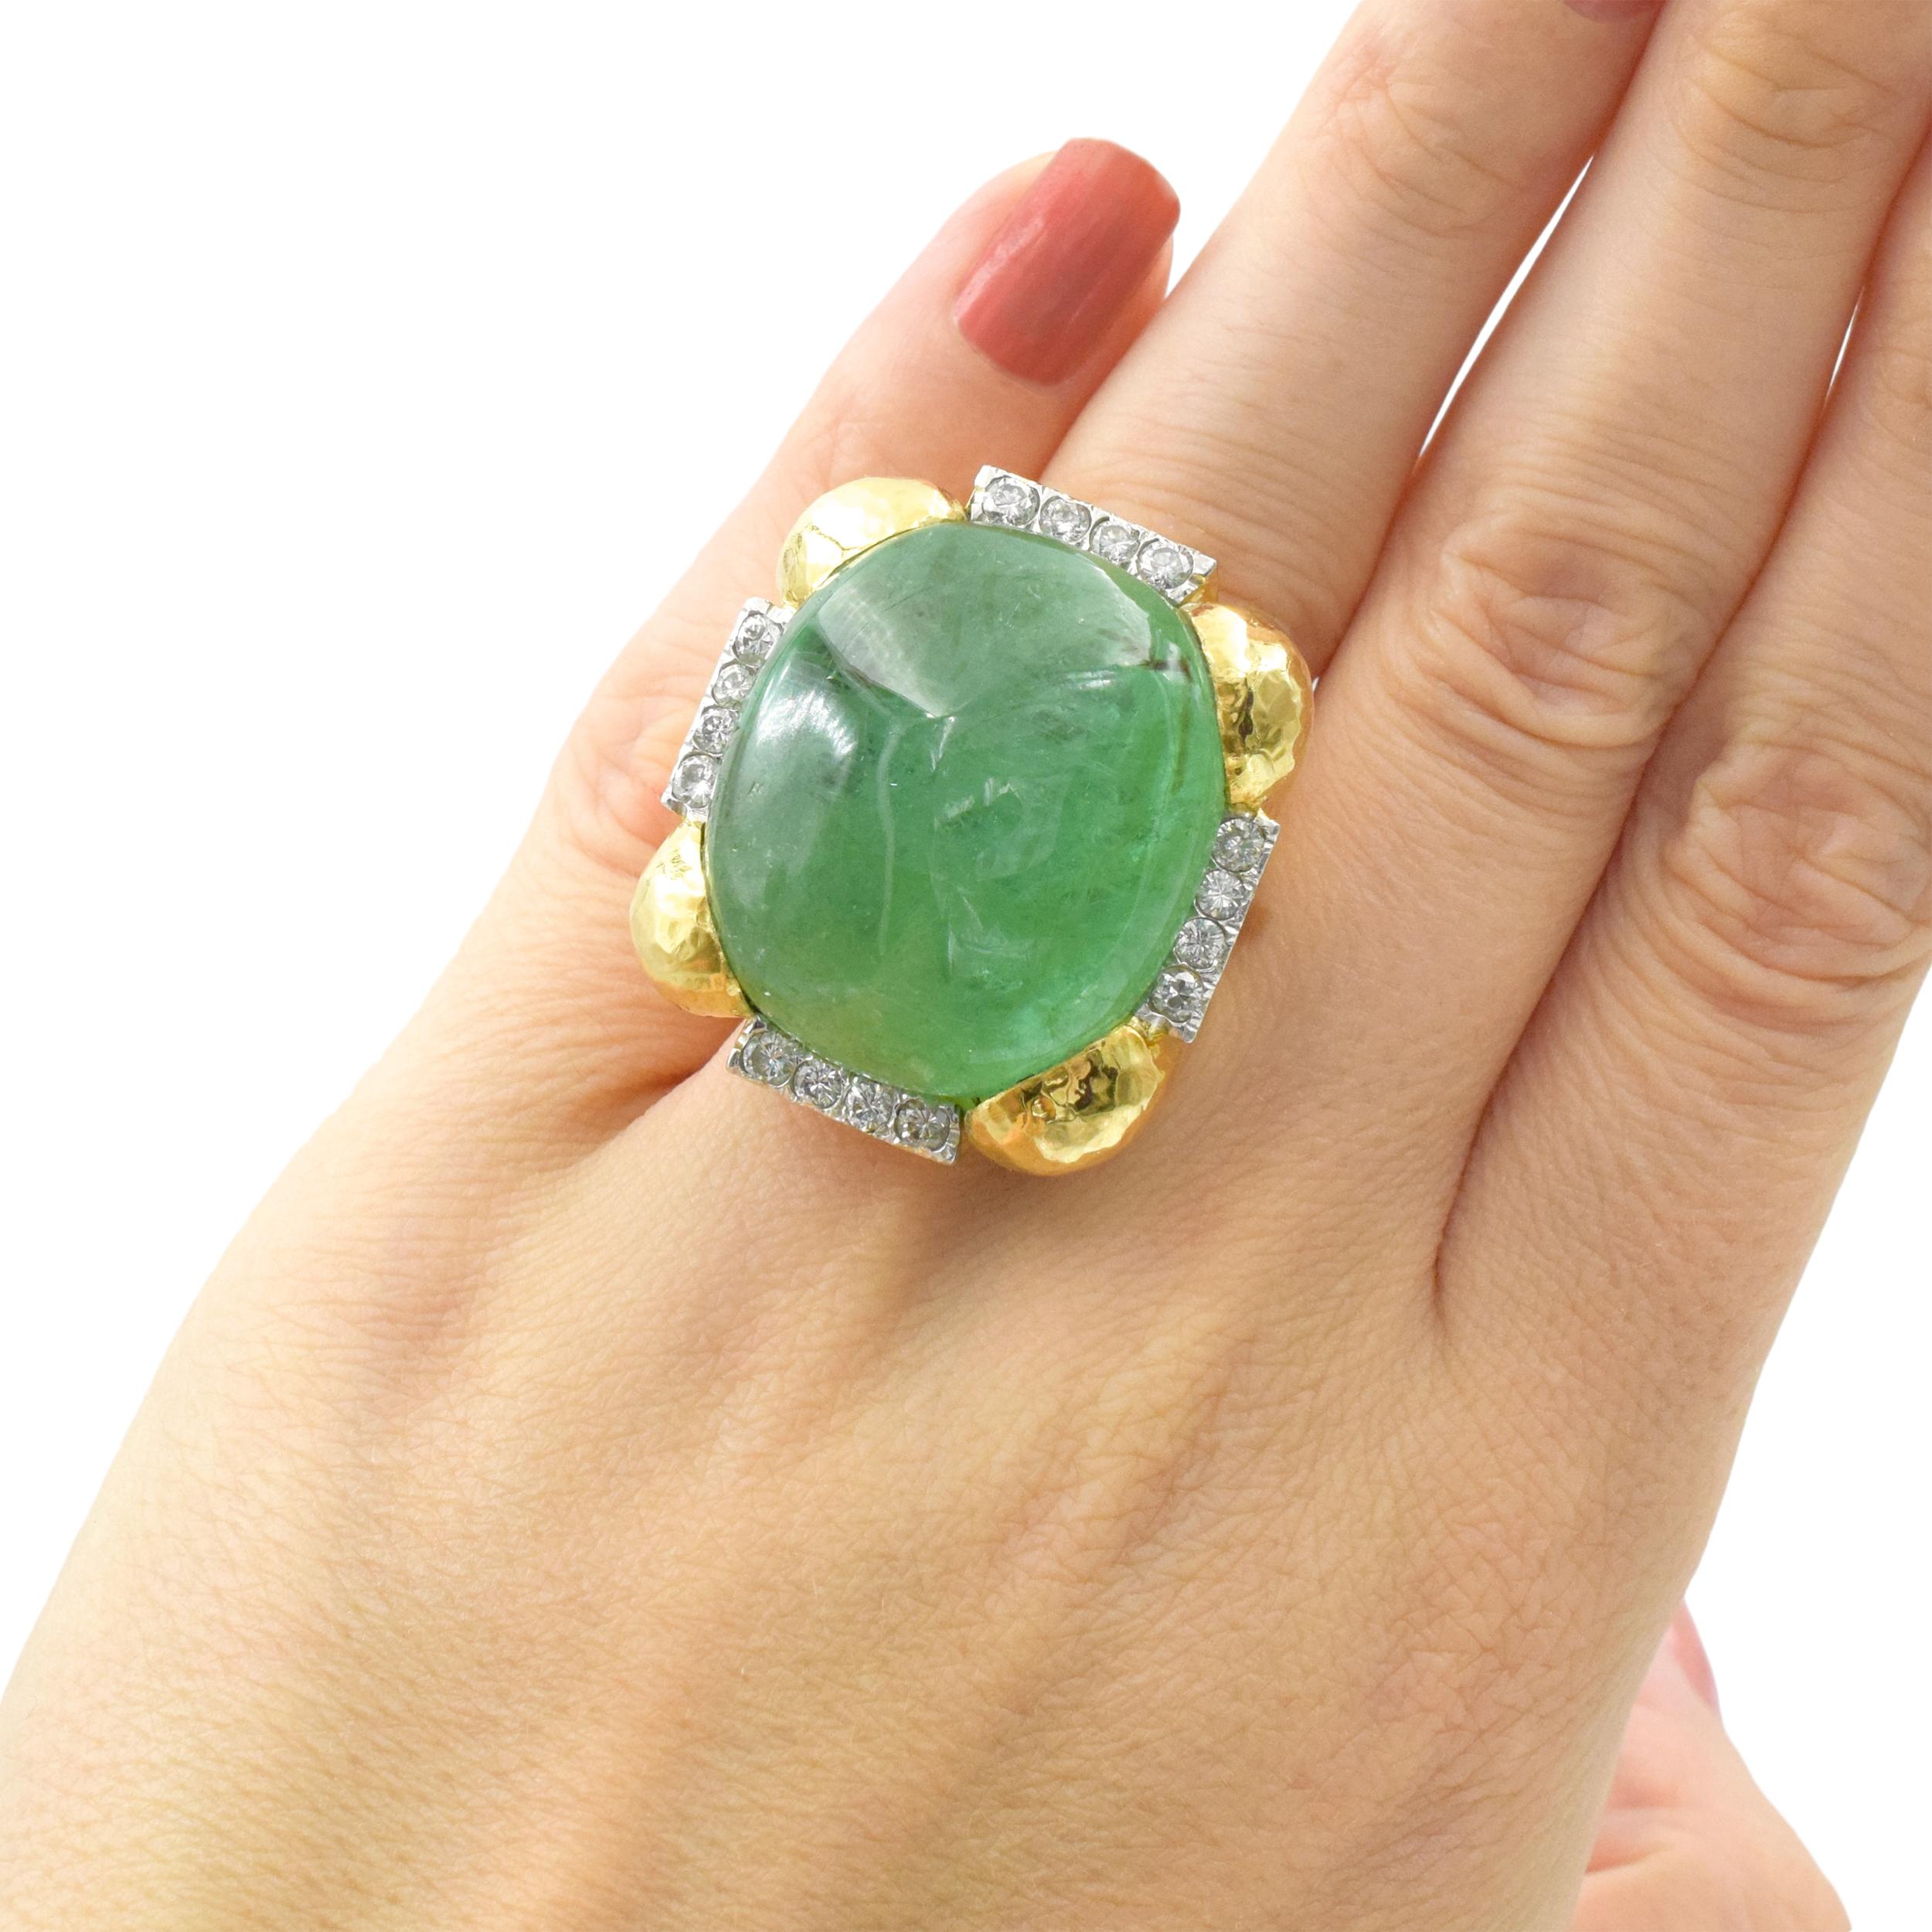 Emerald and diamond statement ring, created in 18k yellow gold. Center of thisring is set with
cabochon cut emerald (weight approx. 40 - 50ct), four sides of the ring flanked by rows of diamonds. Set 16 round brilliant cut diamonds with total weight